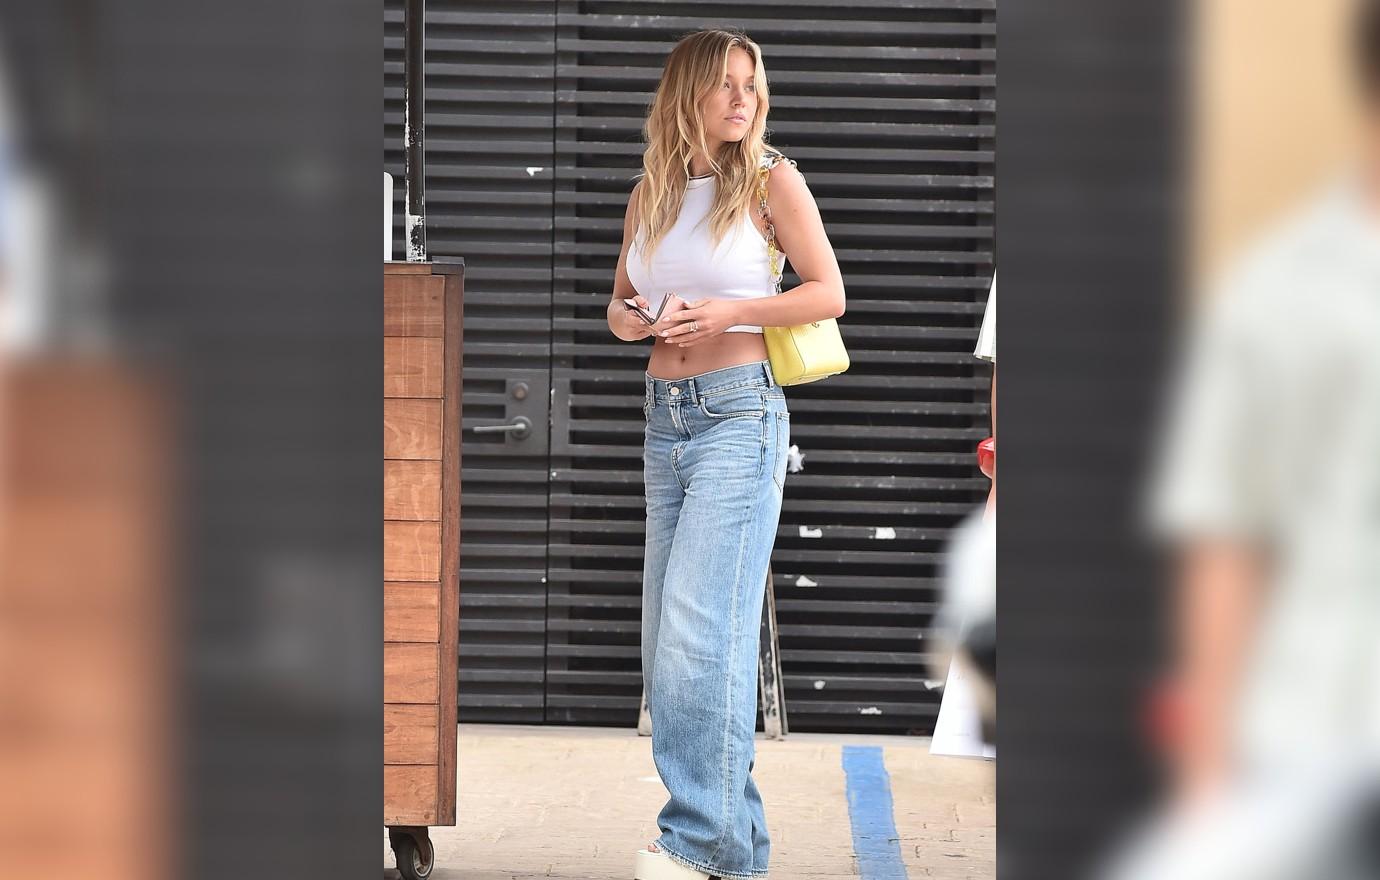 Sydney Sweeney Wore a Cropped Version of a Boston Red Sox Baseball